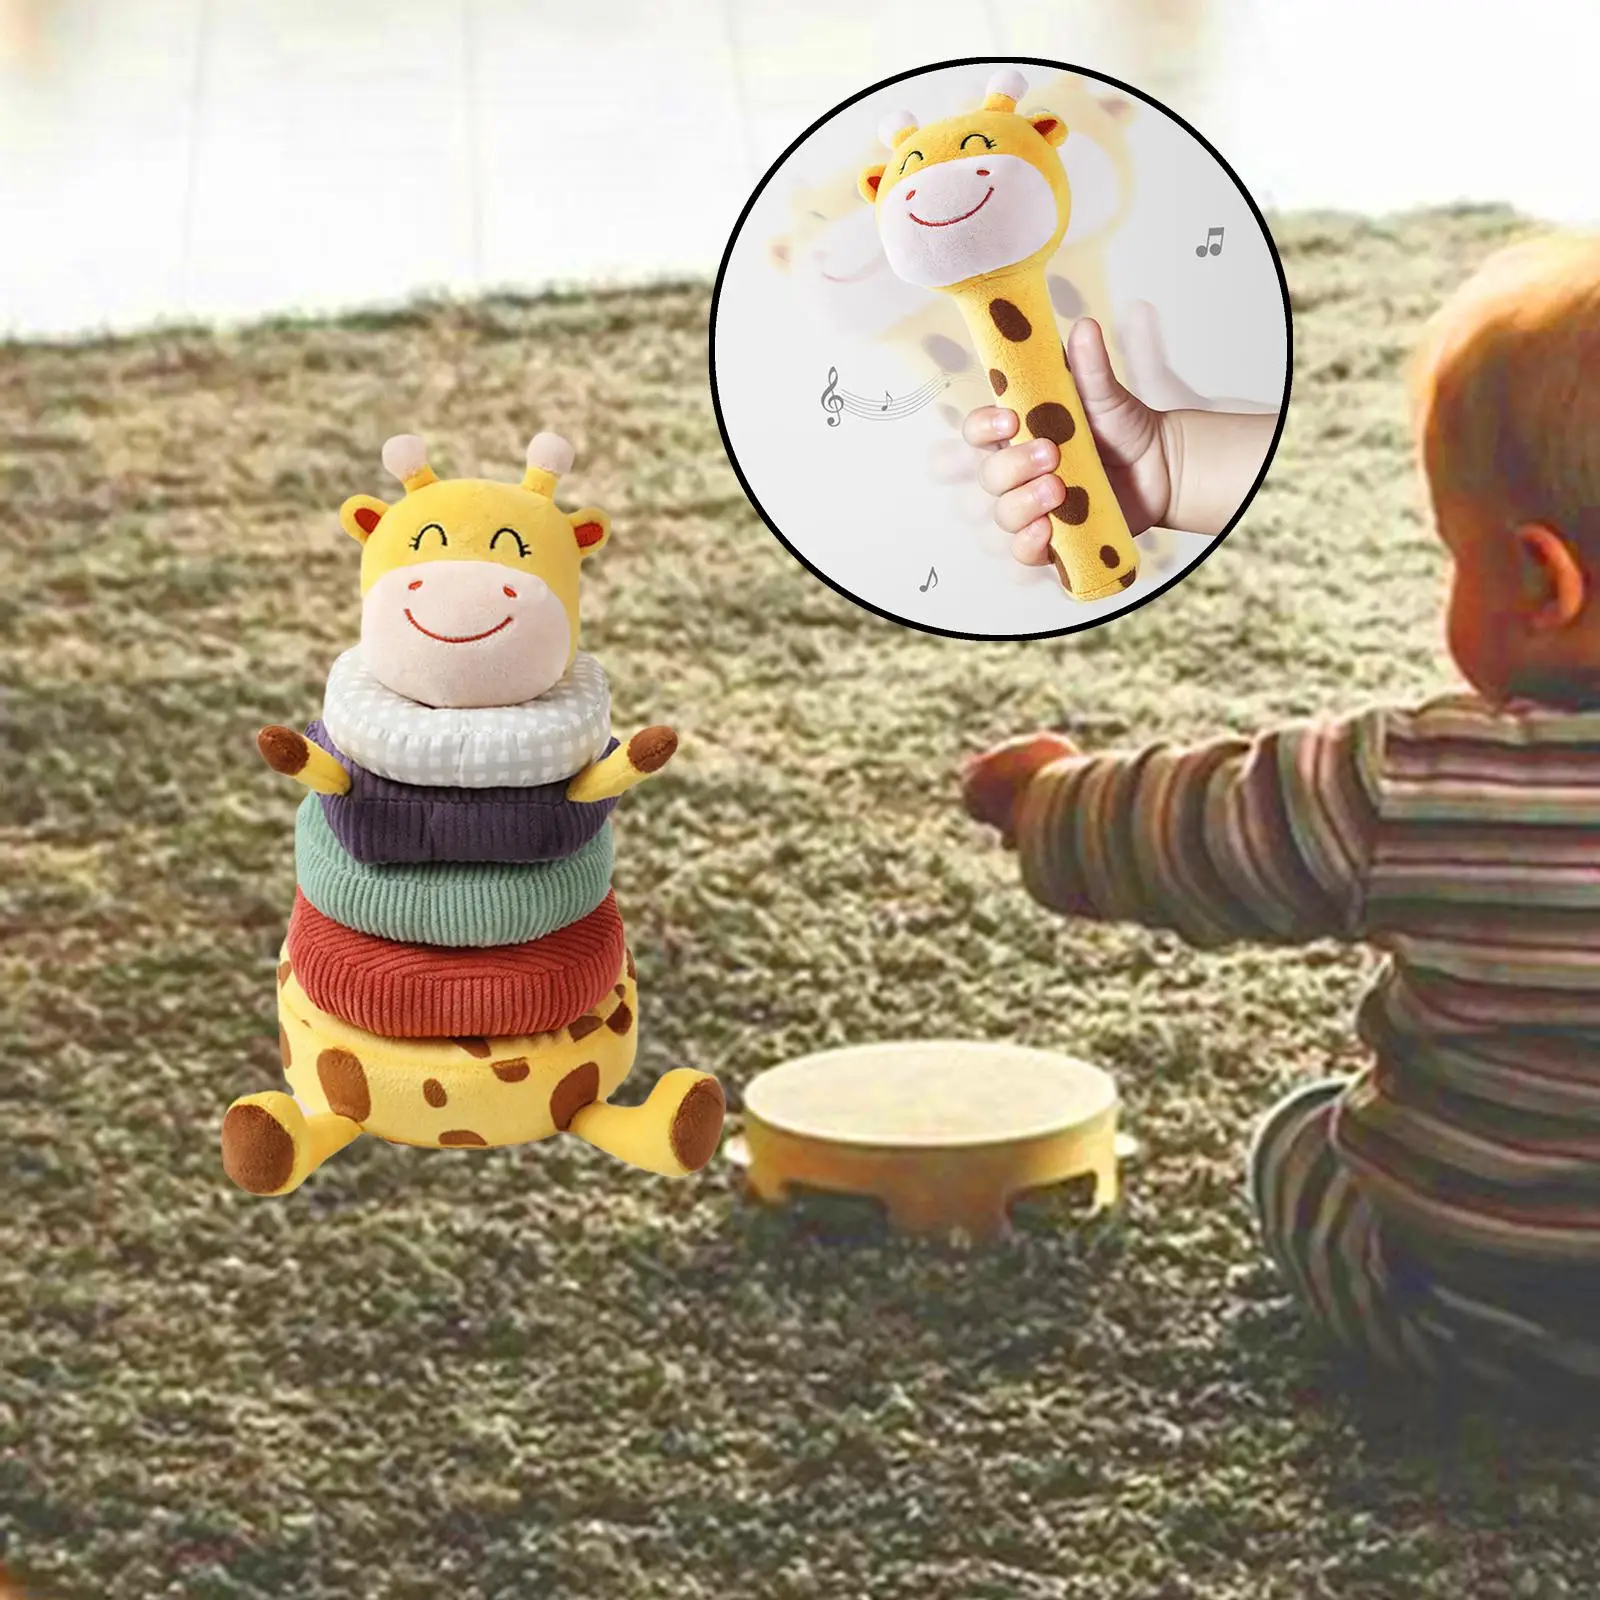 Baby Stacking Rings Toys, Puzzle Rings Stacking Toy Plush Animal Toy for Boys Girls Birthday Gifts